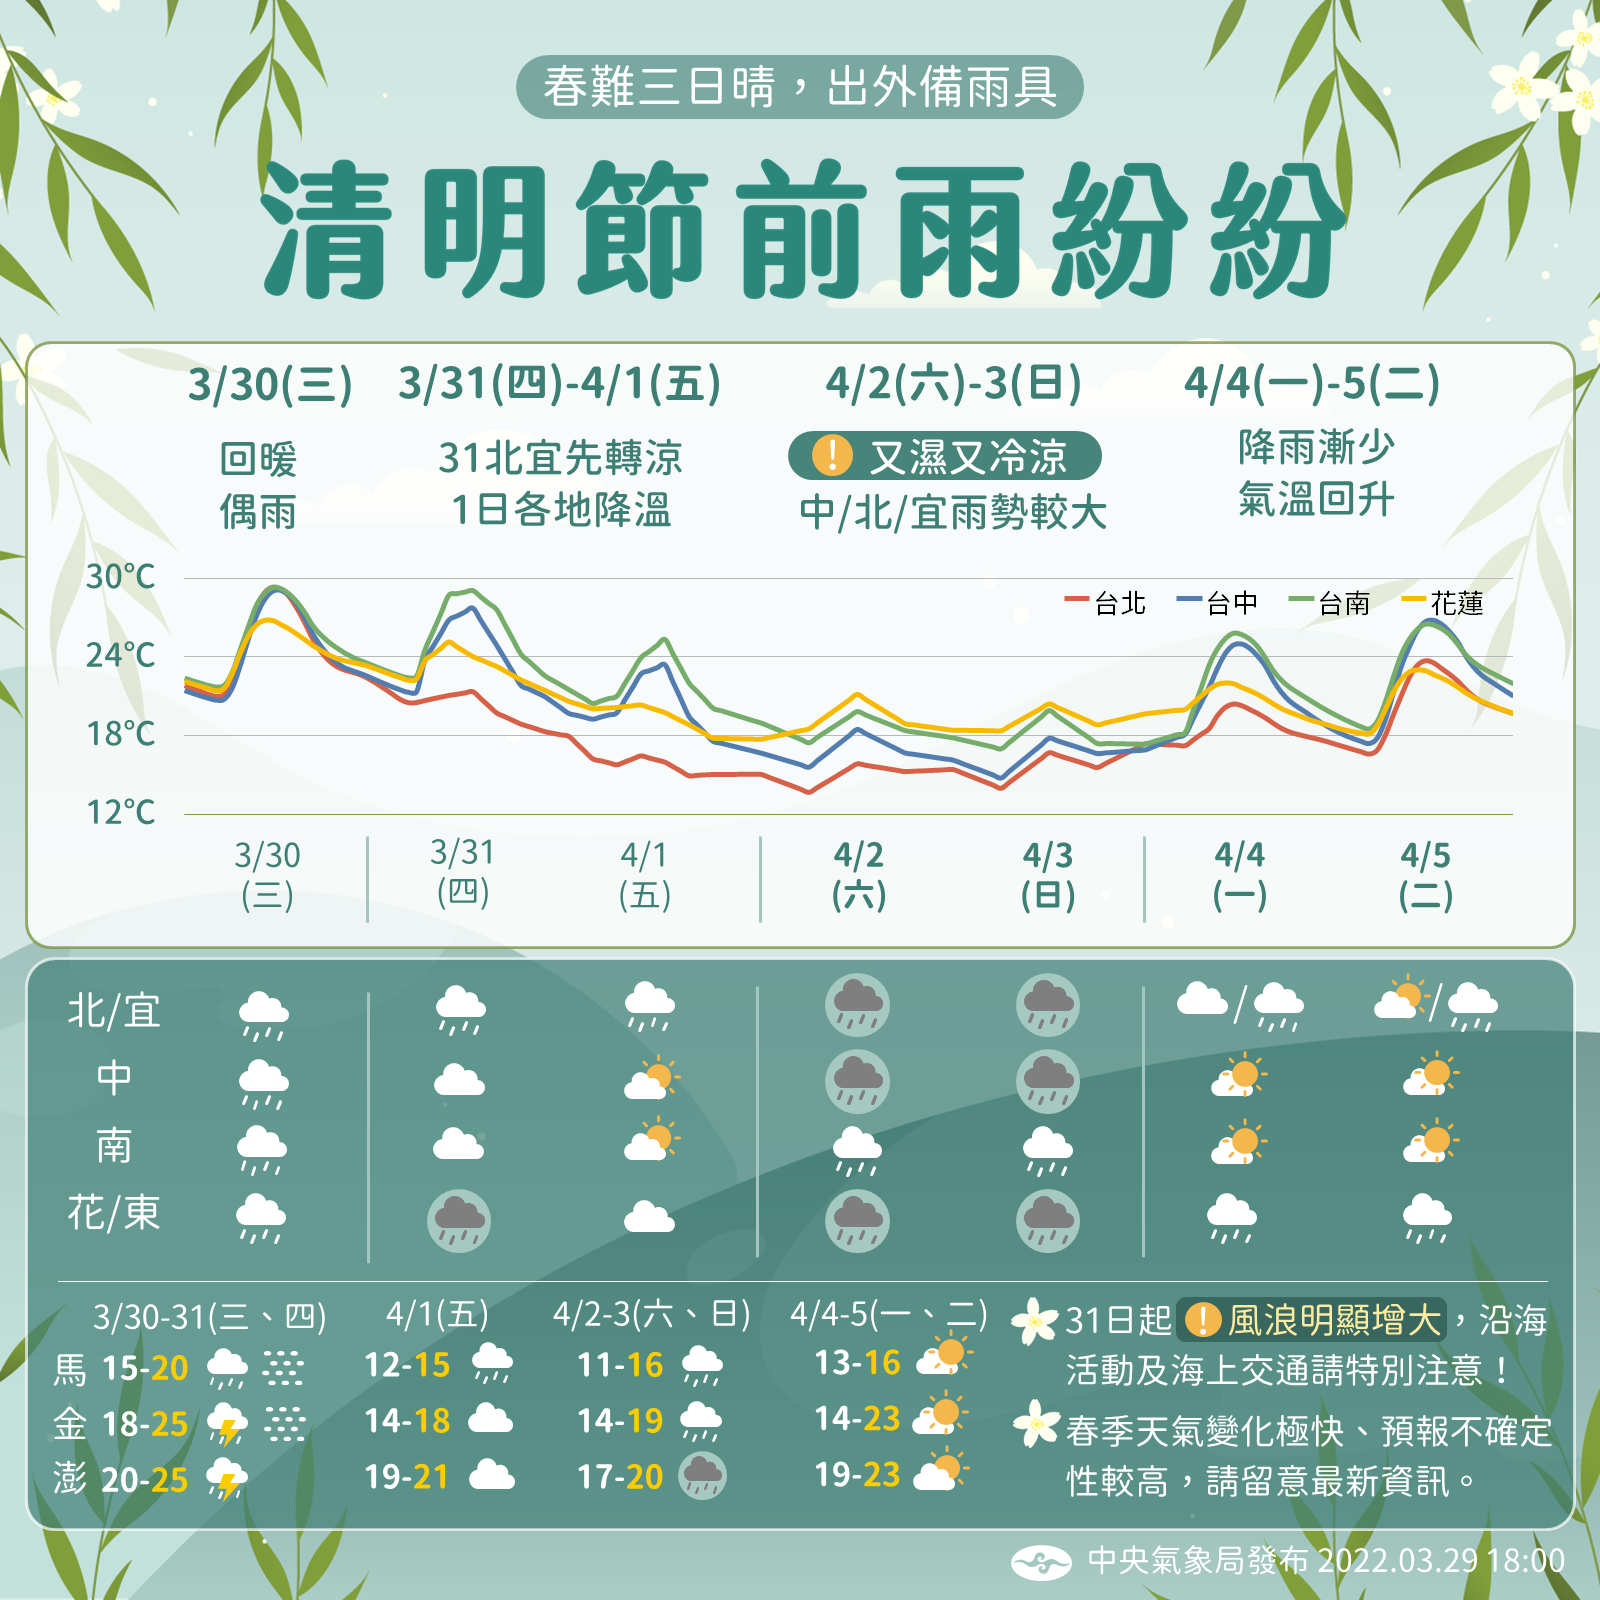 Take a look at the weather on Qingming Festival (picture / taken from the Central Meteorological Administration) Ming plunged 8 degrees and changed again!  "These 2 days" during the Qingming Festival are the coldest in Taiwan, and it is difficult to avoid the rain